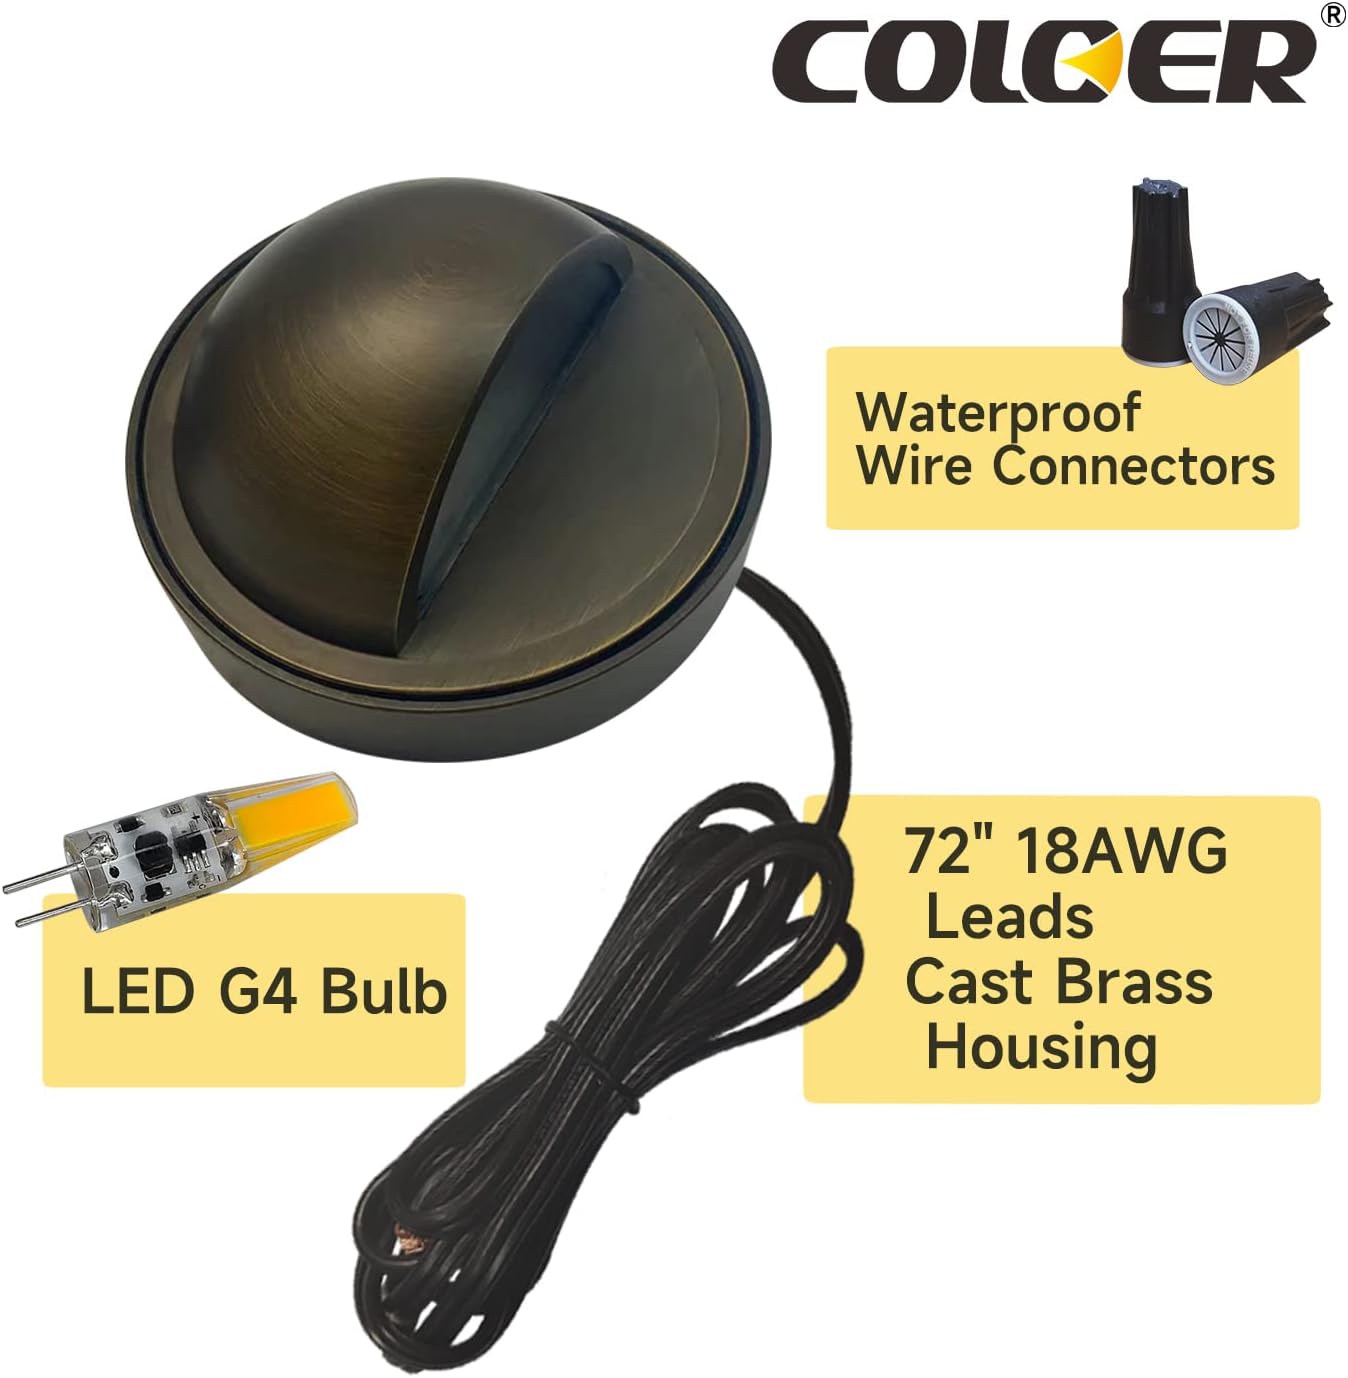 Low voltage waterproof brass deck light with LED G4 bulb and wire connectors for backyard landscape lighting COD401B